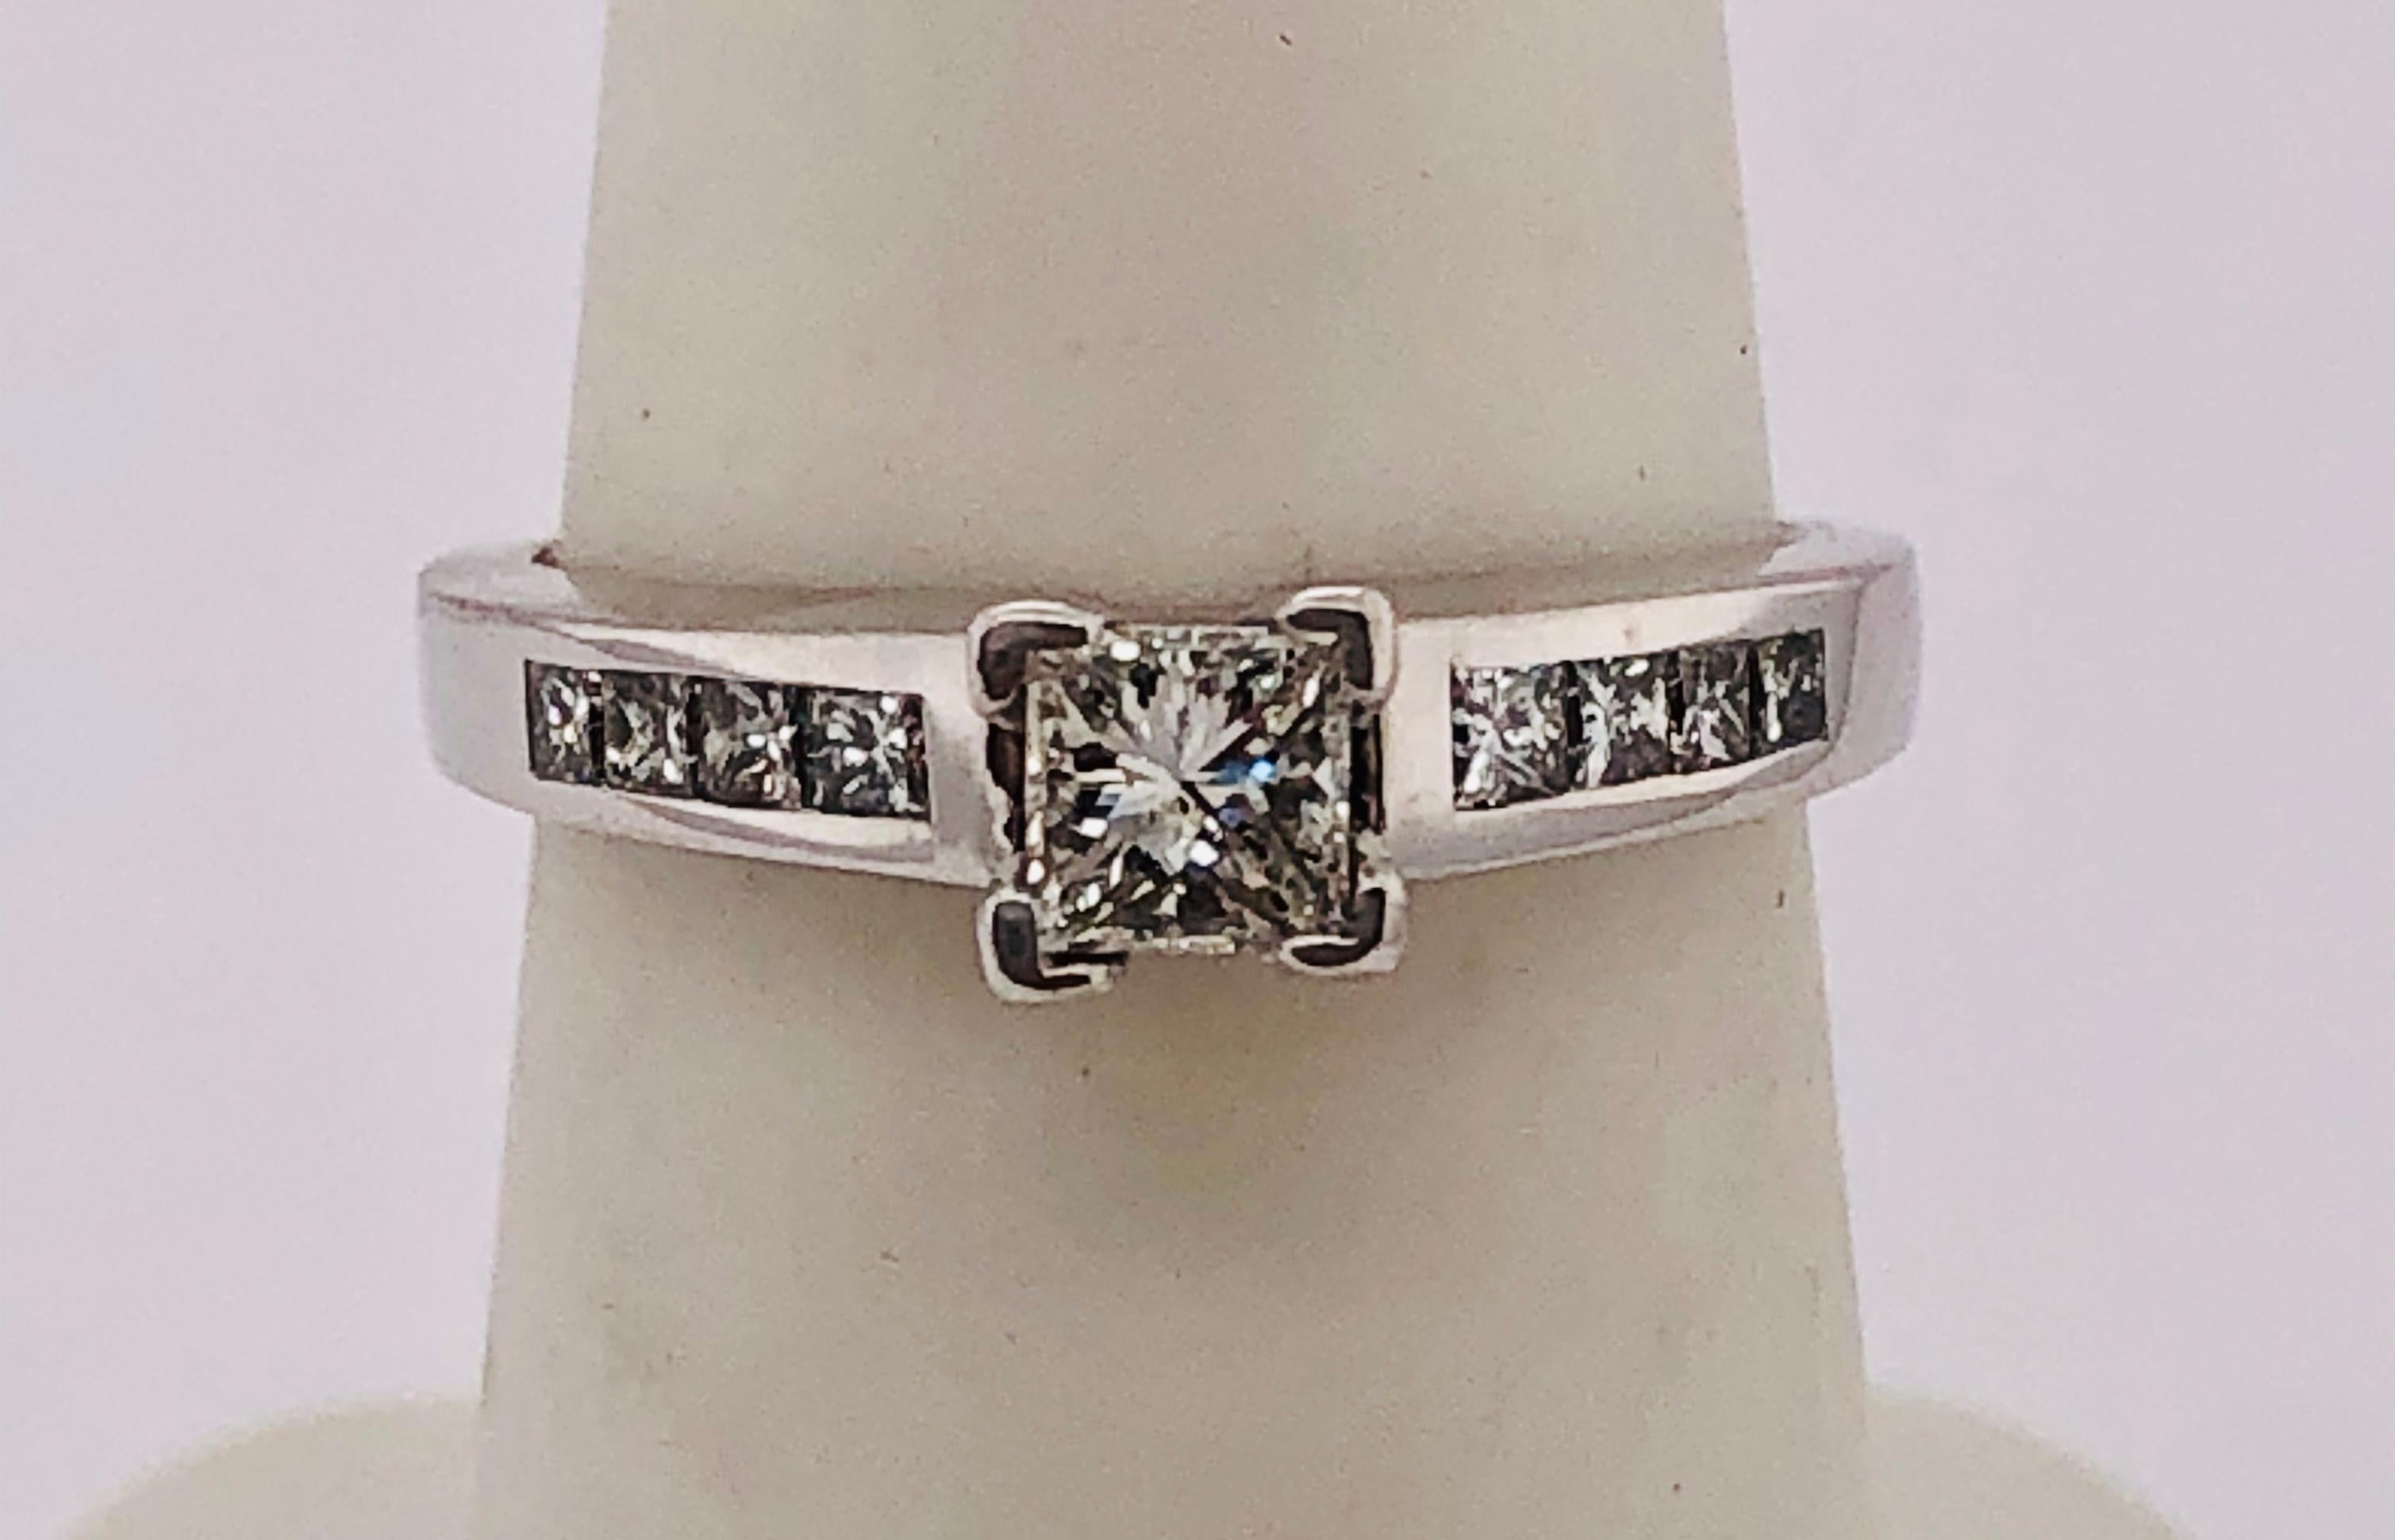 14Kt White Gold Diamond Engagement Ring 1.40 Total Diamond Weight. The center stone is half a carat. 
Size 6.5 with 3.7 grams total weight.